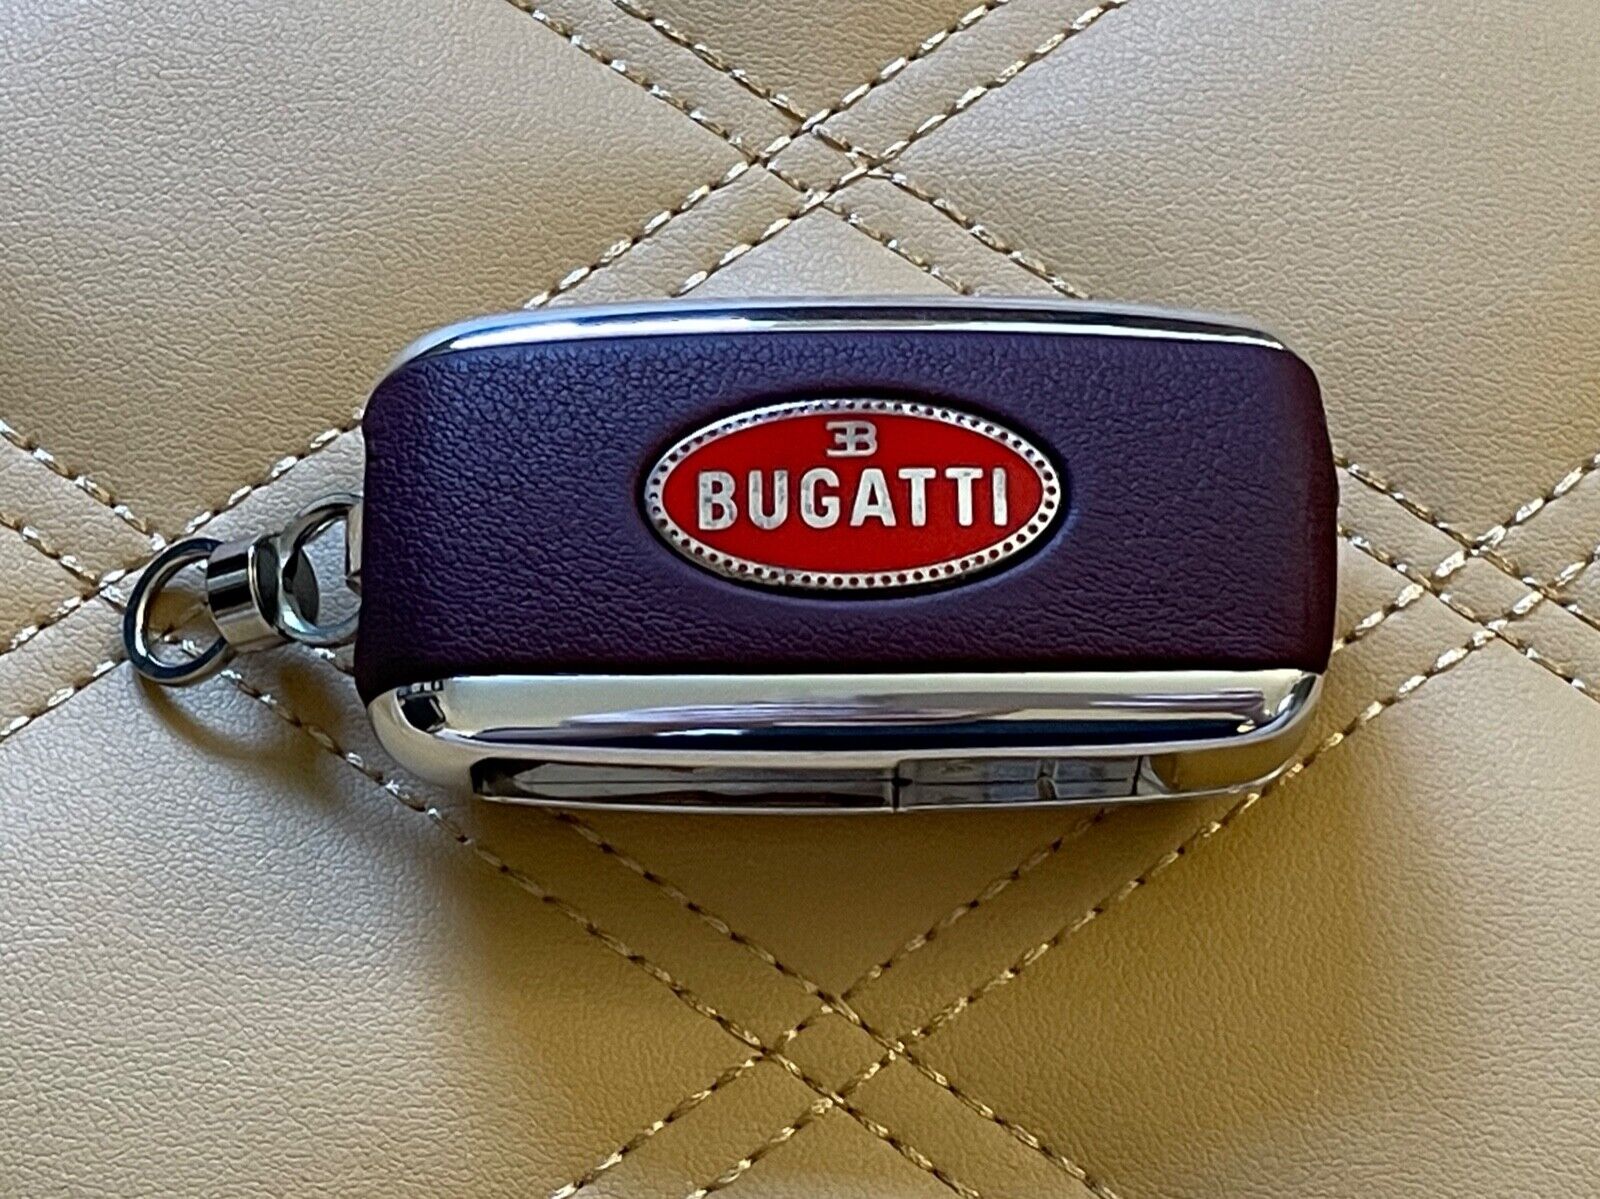 Bugatti Veyron Leather Ignition Key Own a Piece of the legend Collector Item 